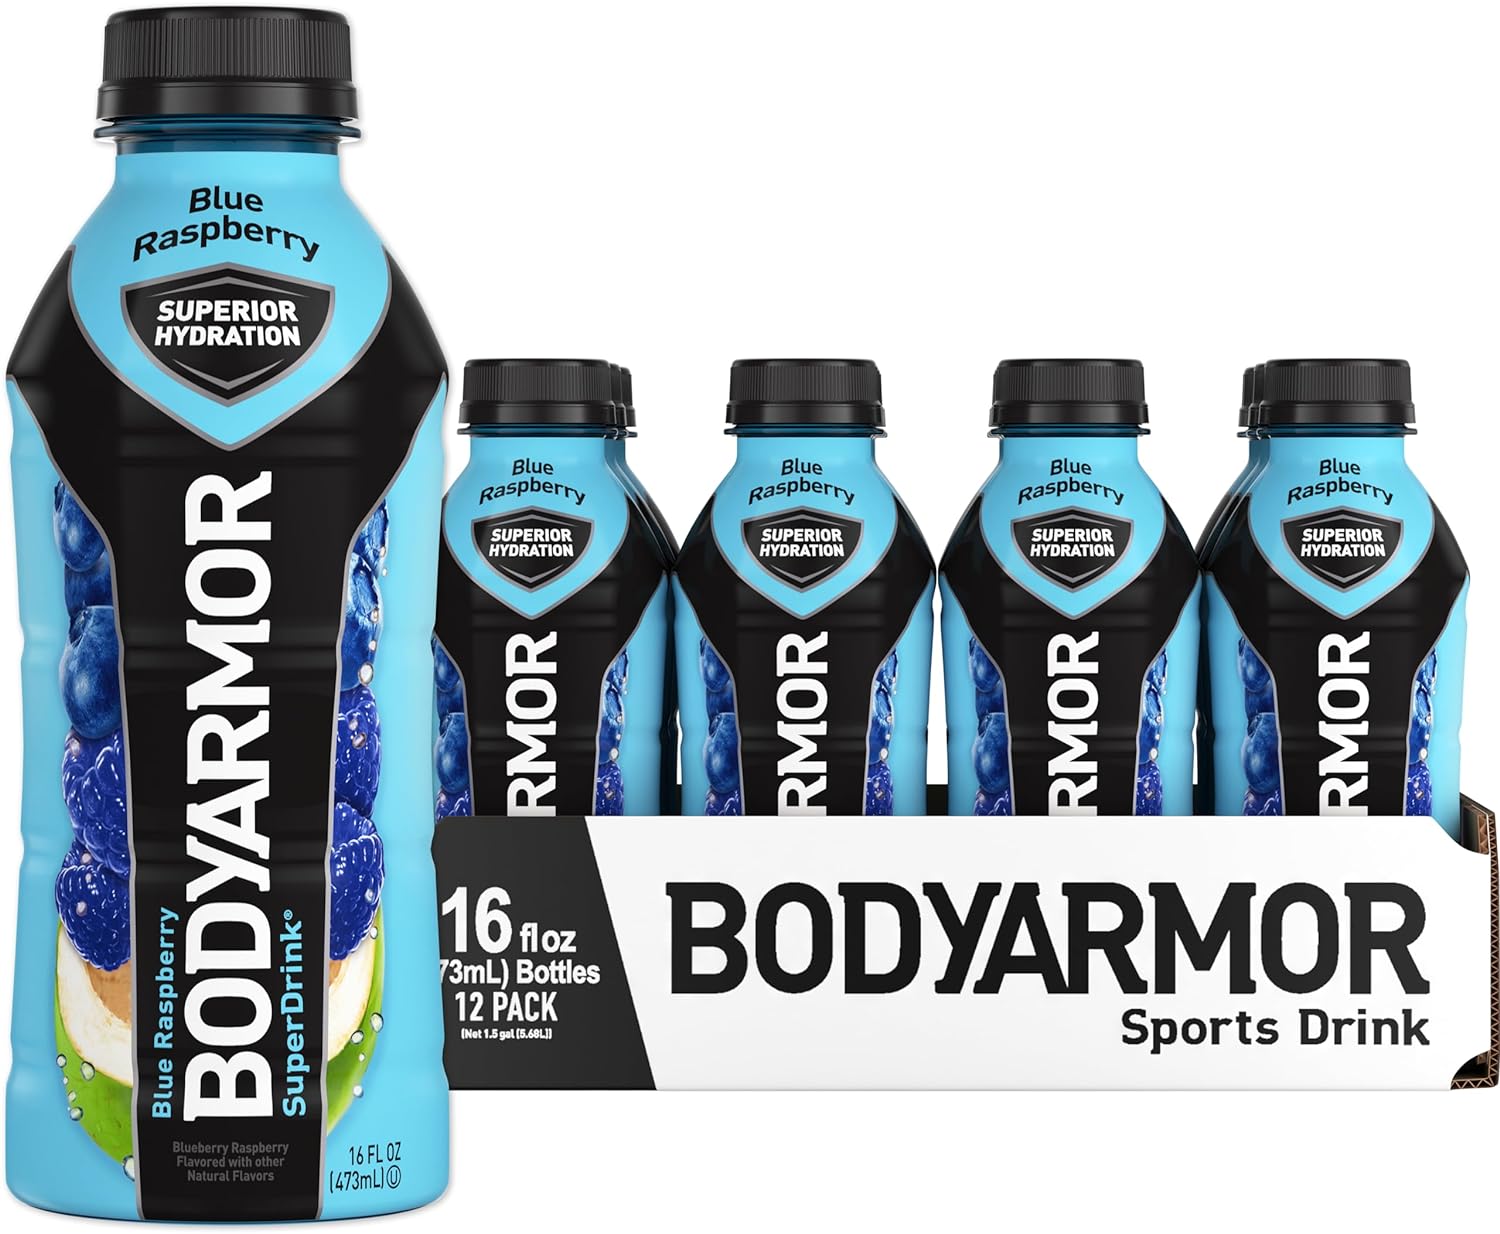 12-Pack 16-Oz BODYARMOR Sports Drink (Blue Raspberry) $10.59 w/ S&S + Free Shipping w/ Prime or on $35+